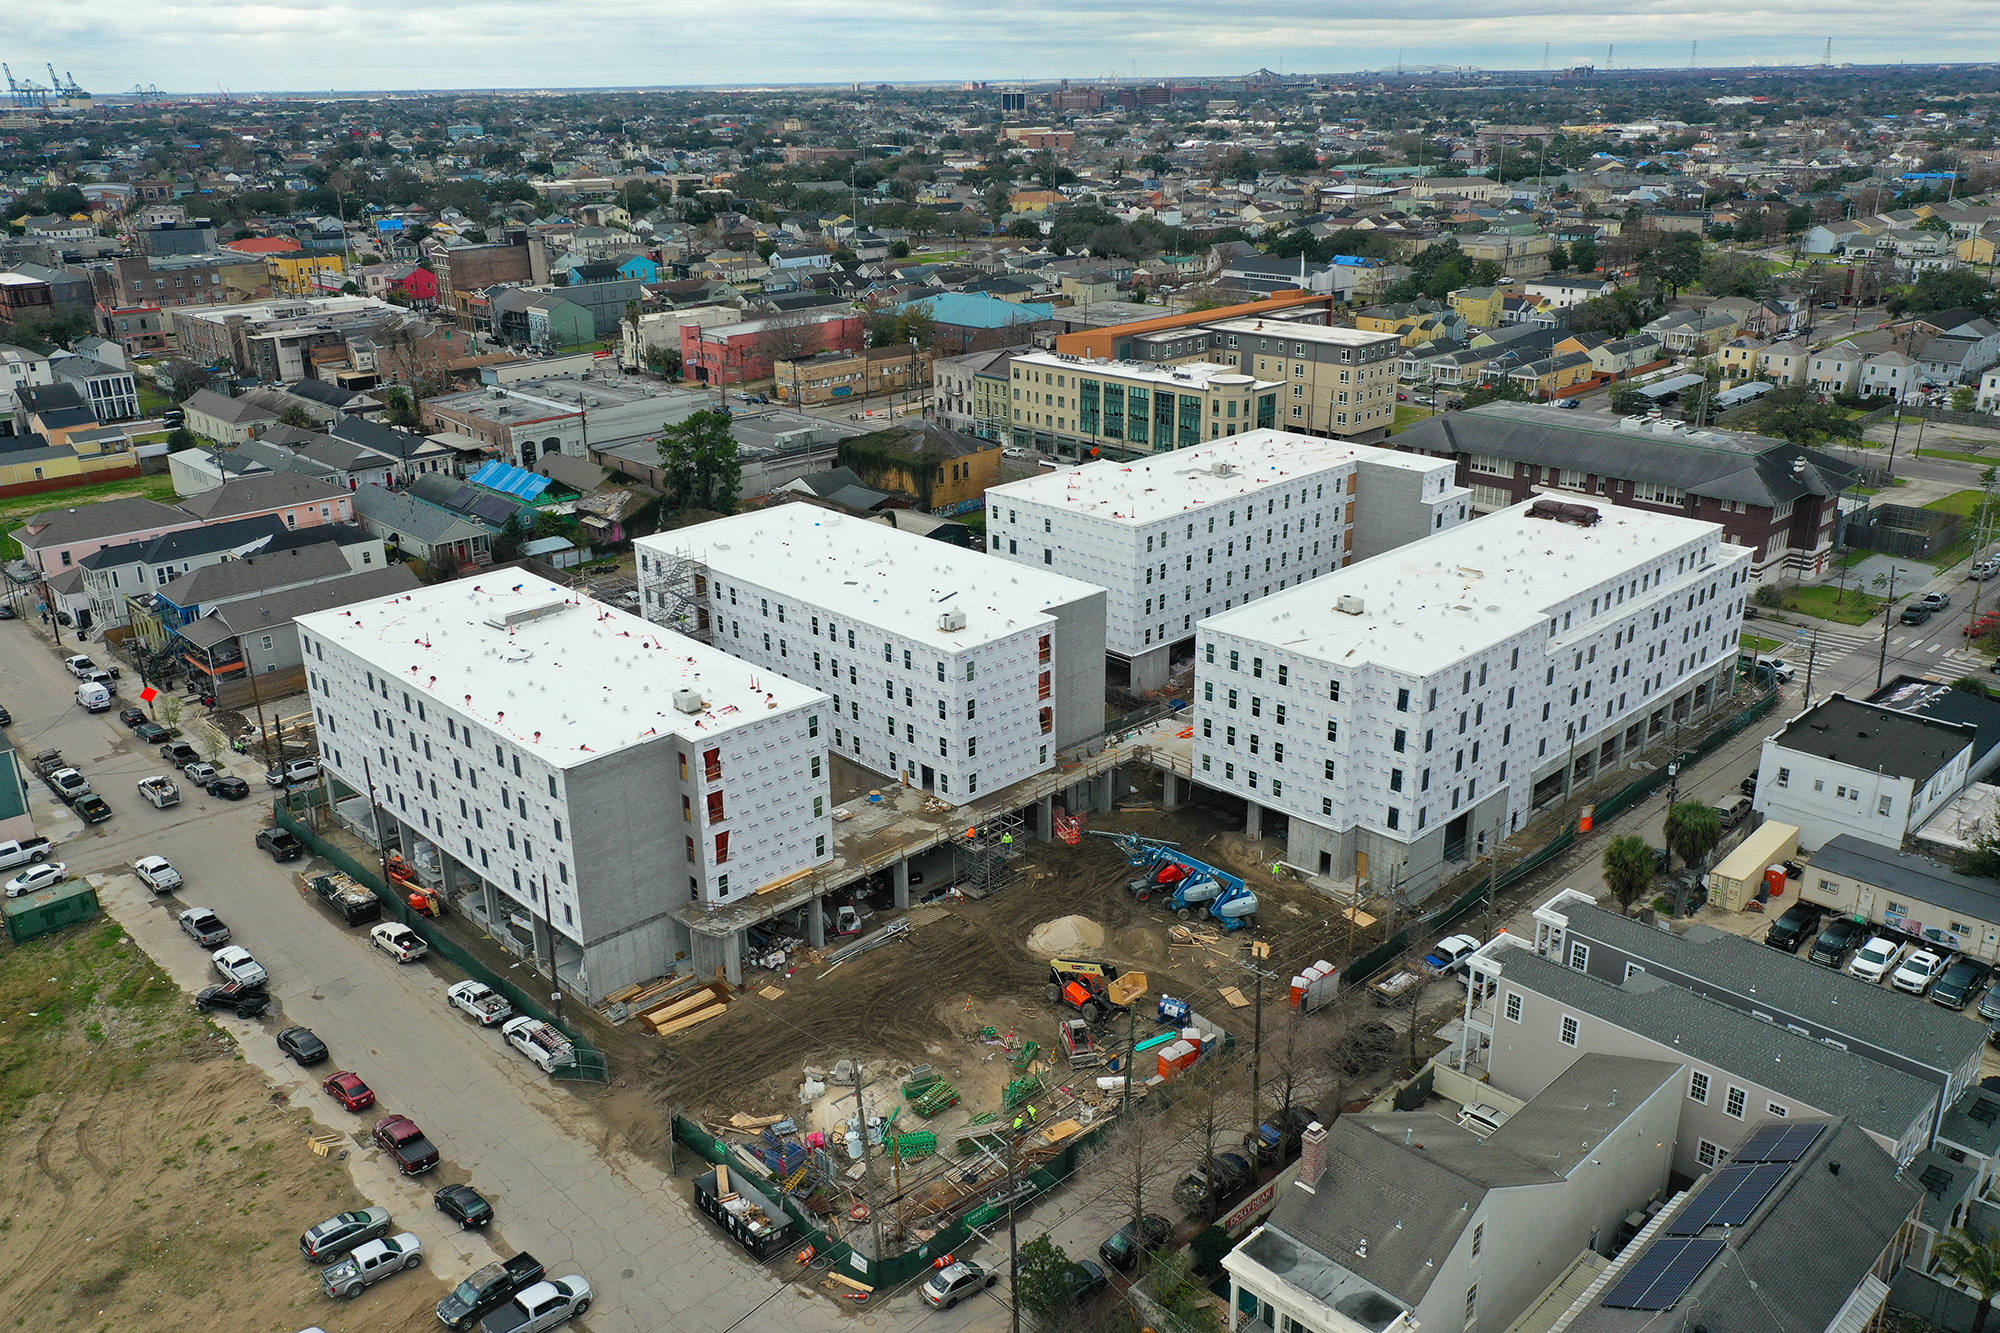 12,000 square foot housing community aerial view